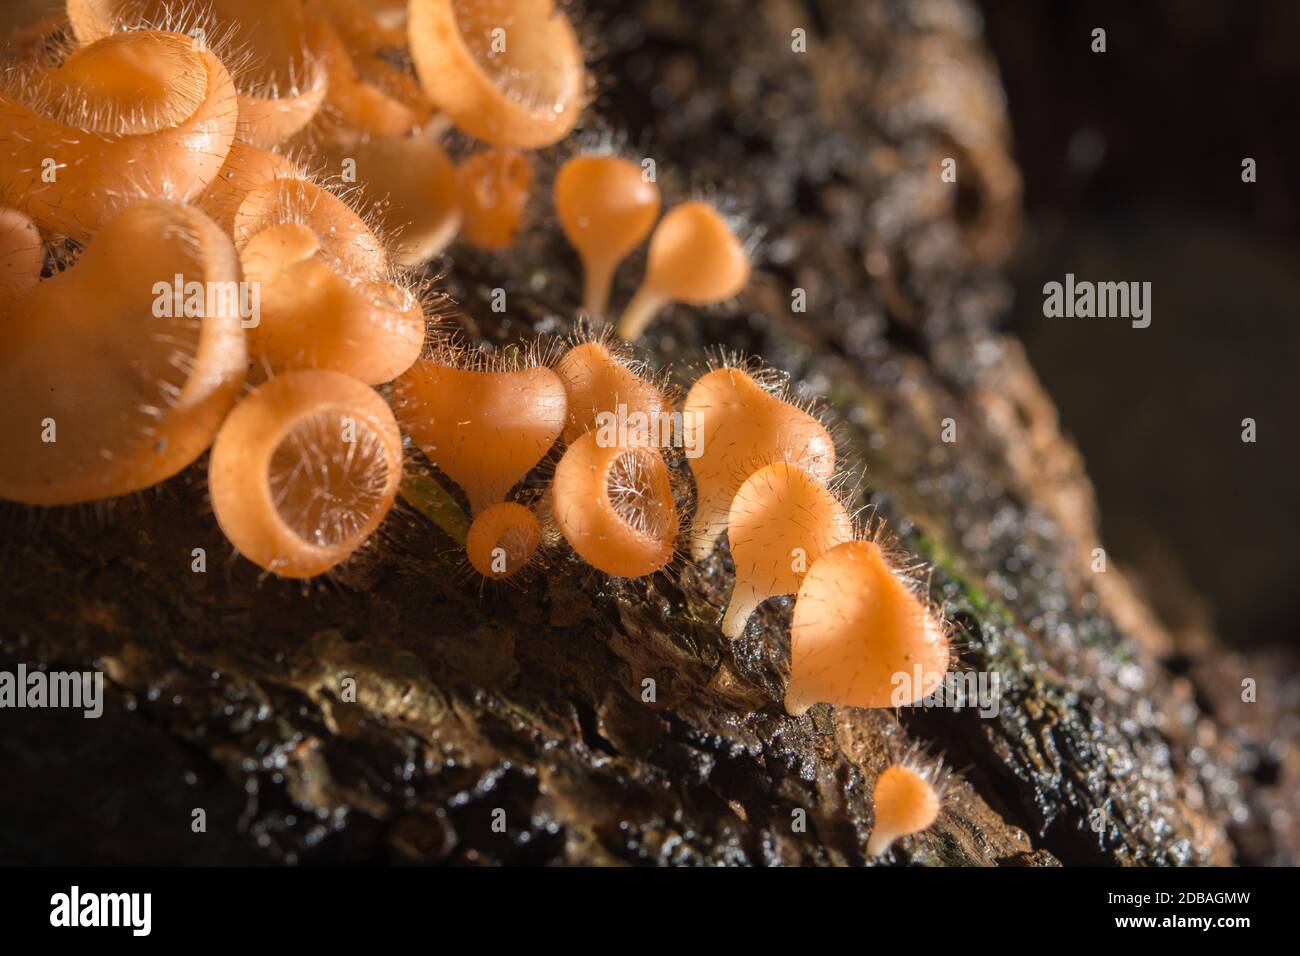 Mushroom in the rain forest among the fallen leaves and bark Stock Photo